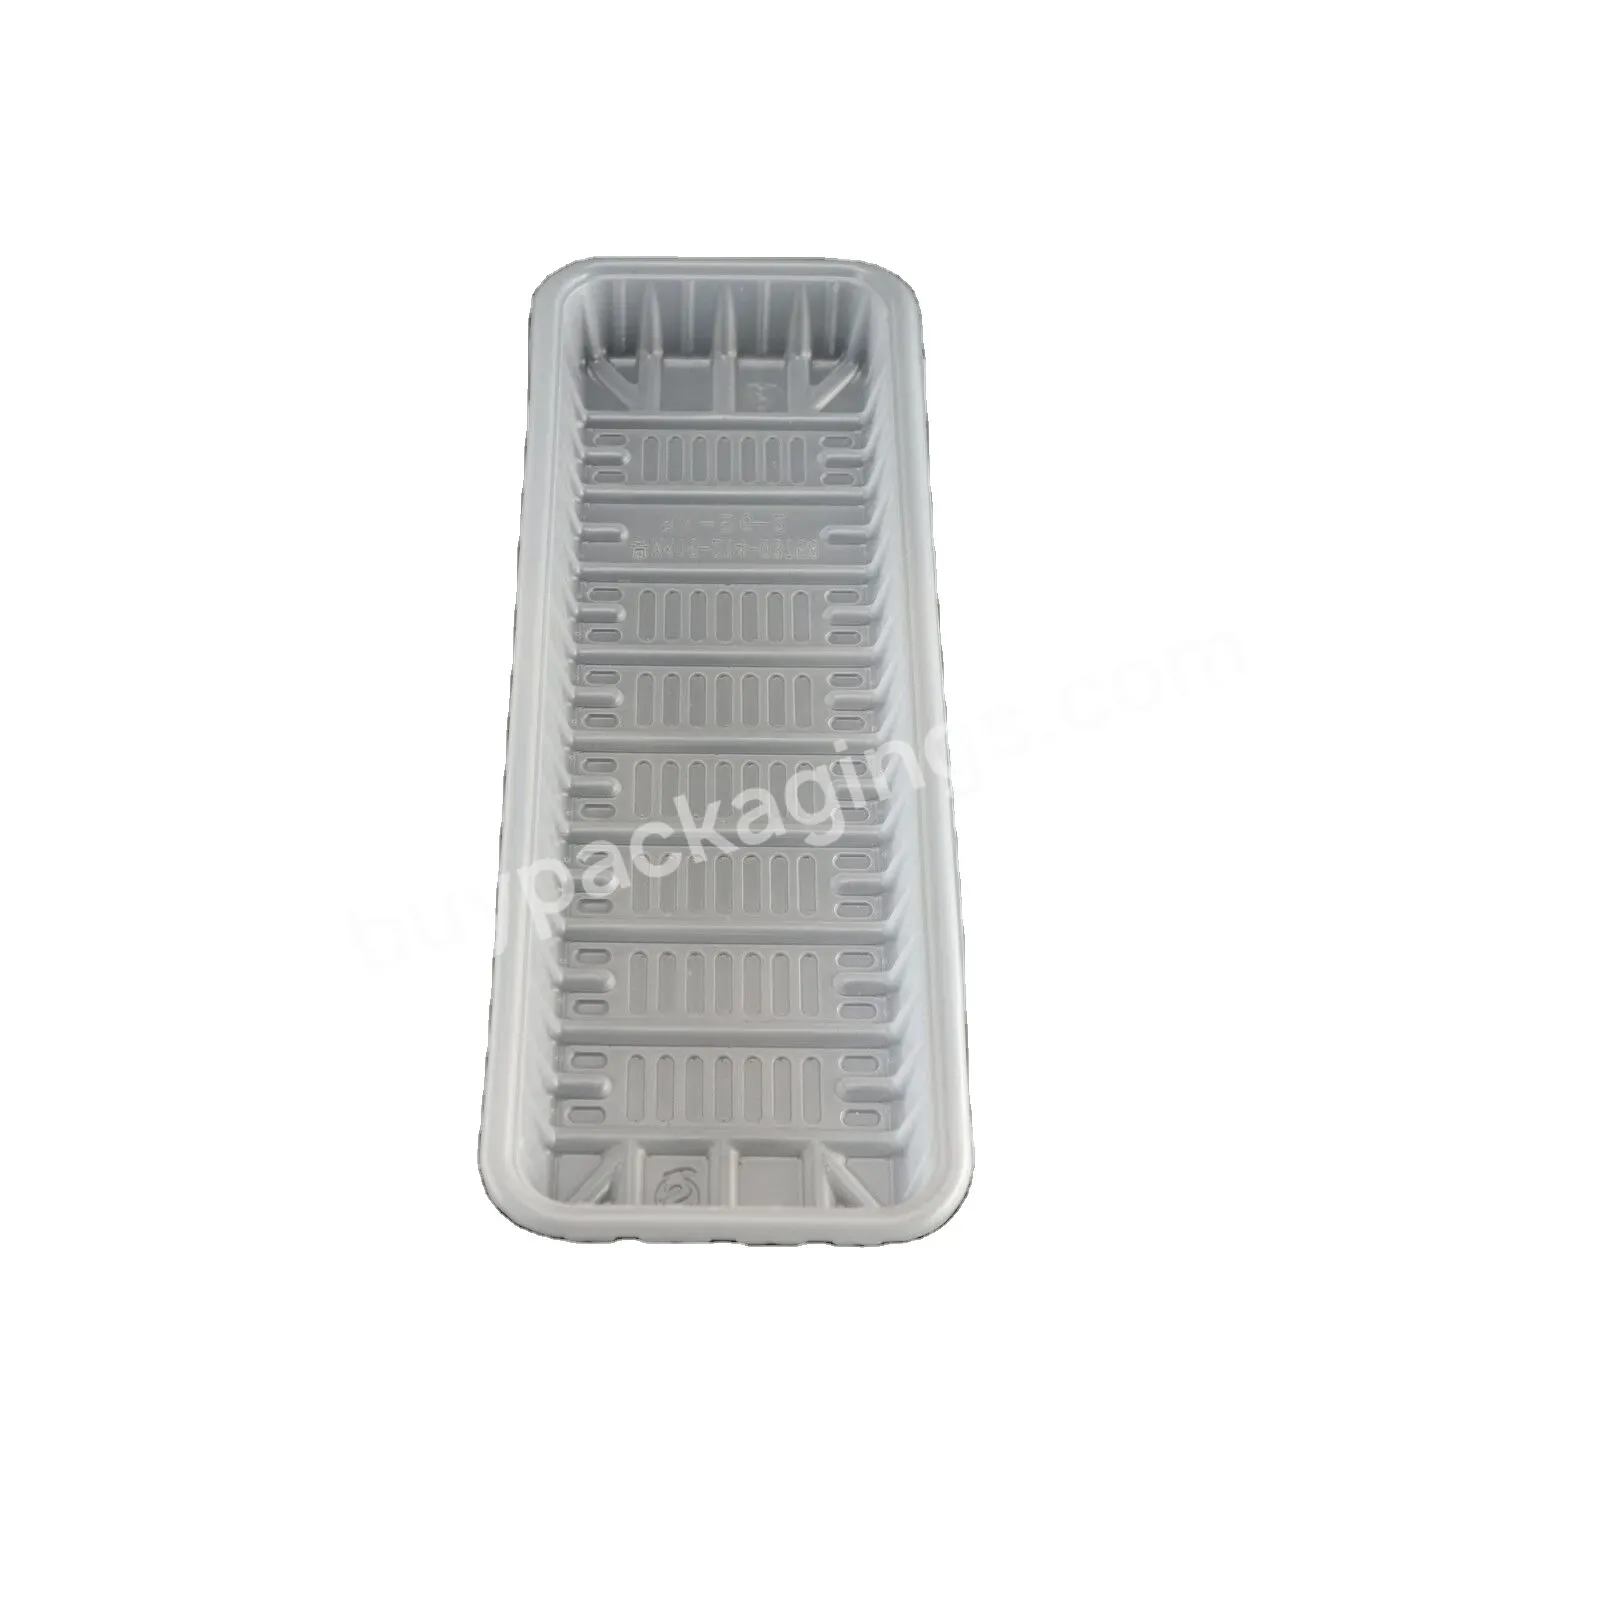 Disposable Biodegradable Plastic Thawing Tray For Frozen Pet Meat Trays Manufacture In China - Buy Disposable Tray For Meat,Pet Meat Trays Manufacture In China,Plastic Frozen Meat Trays.